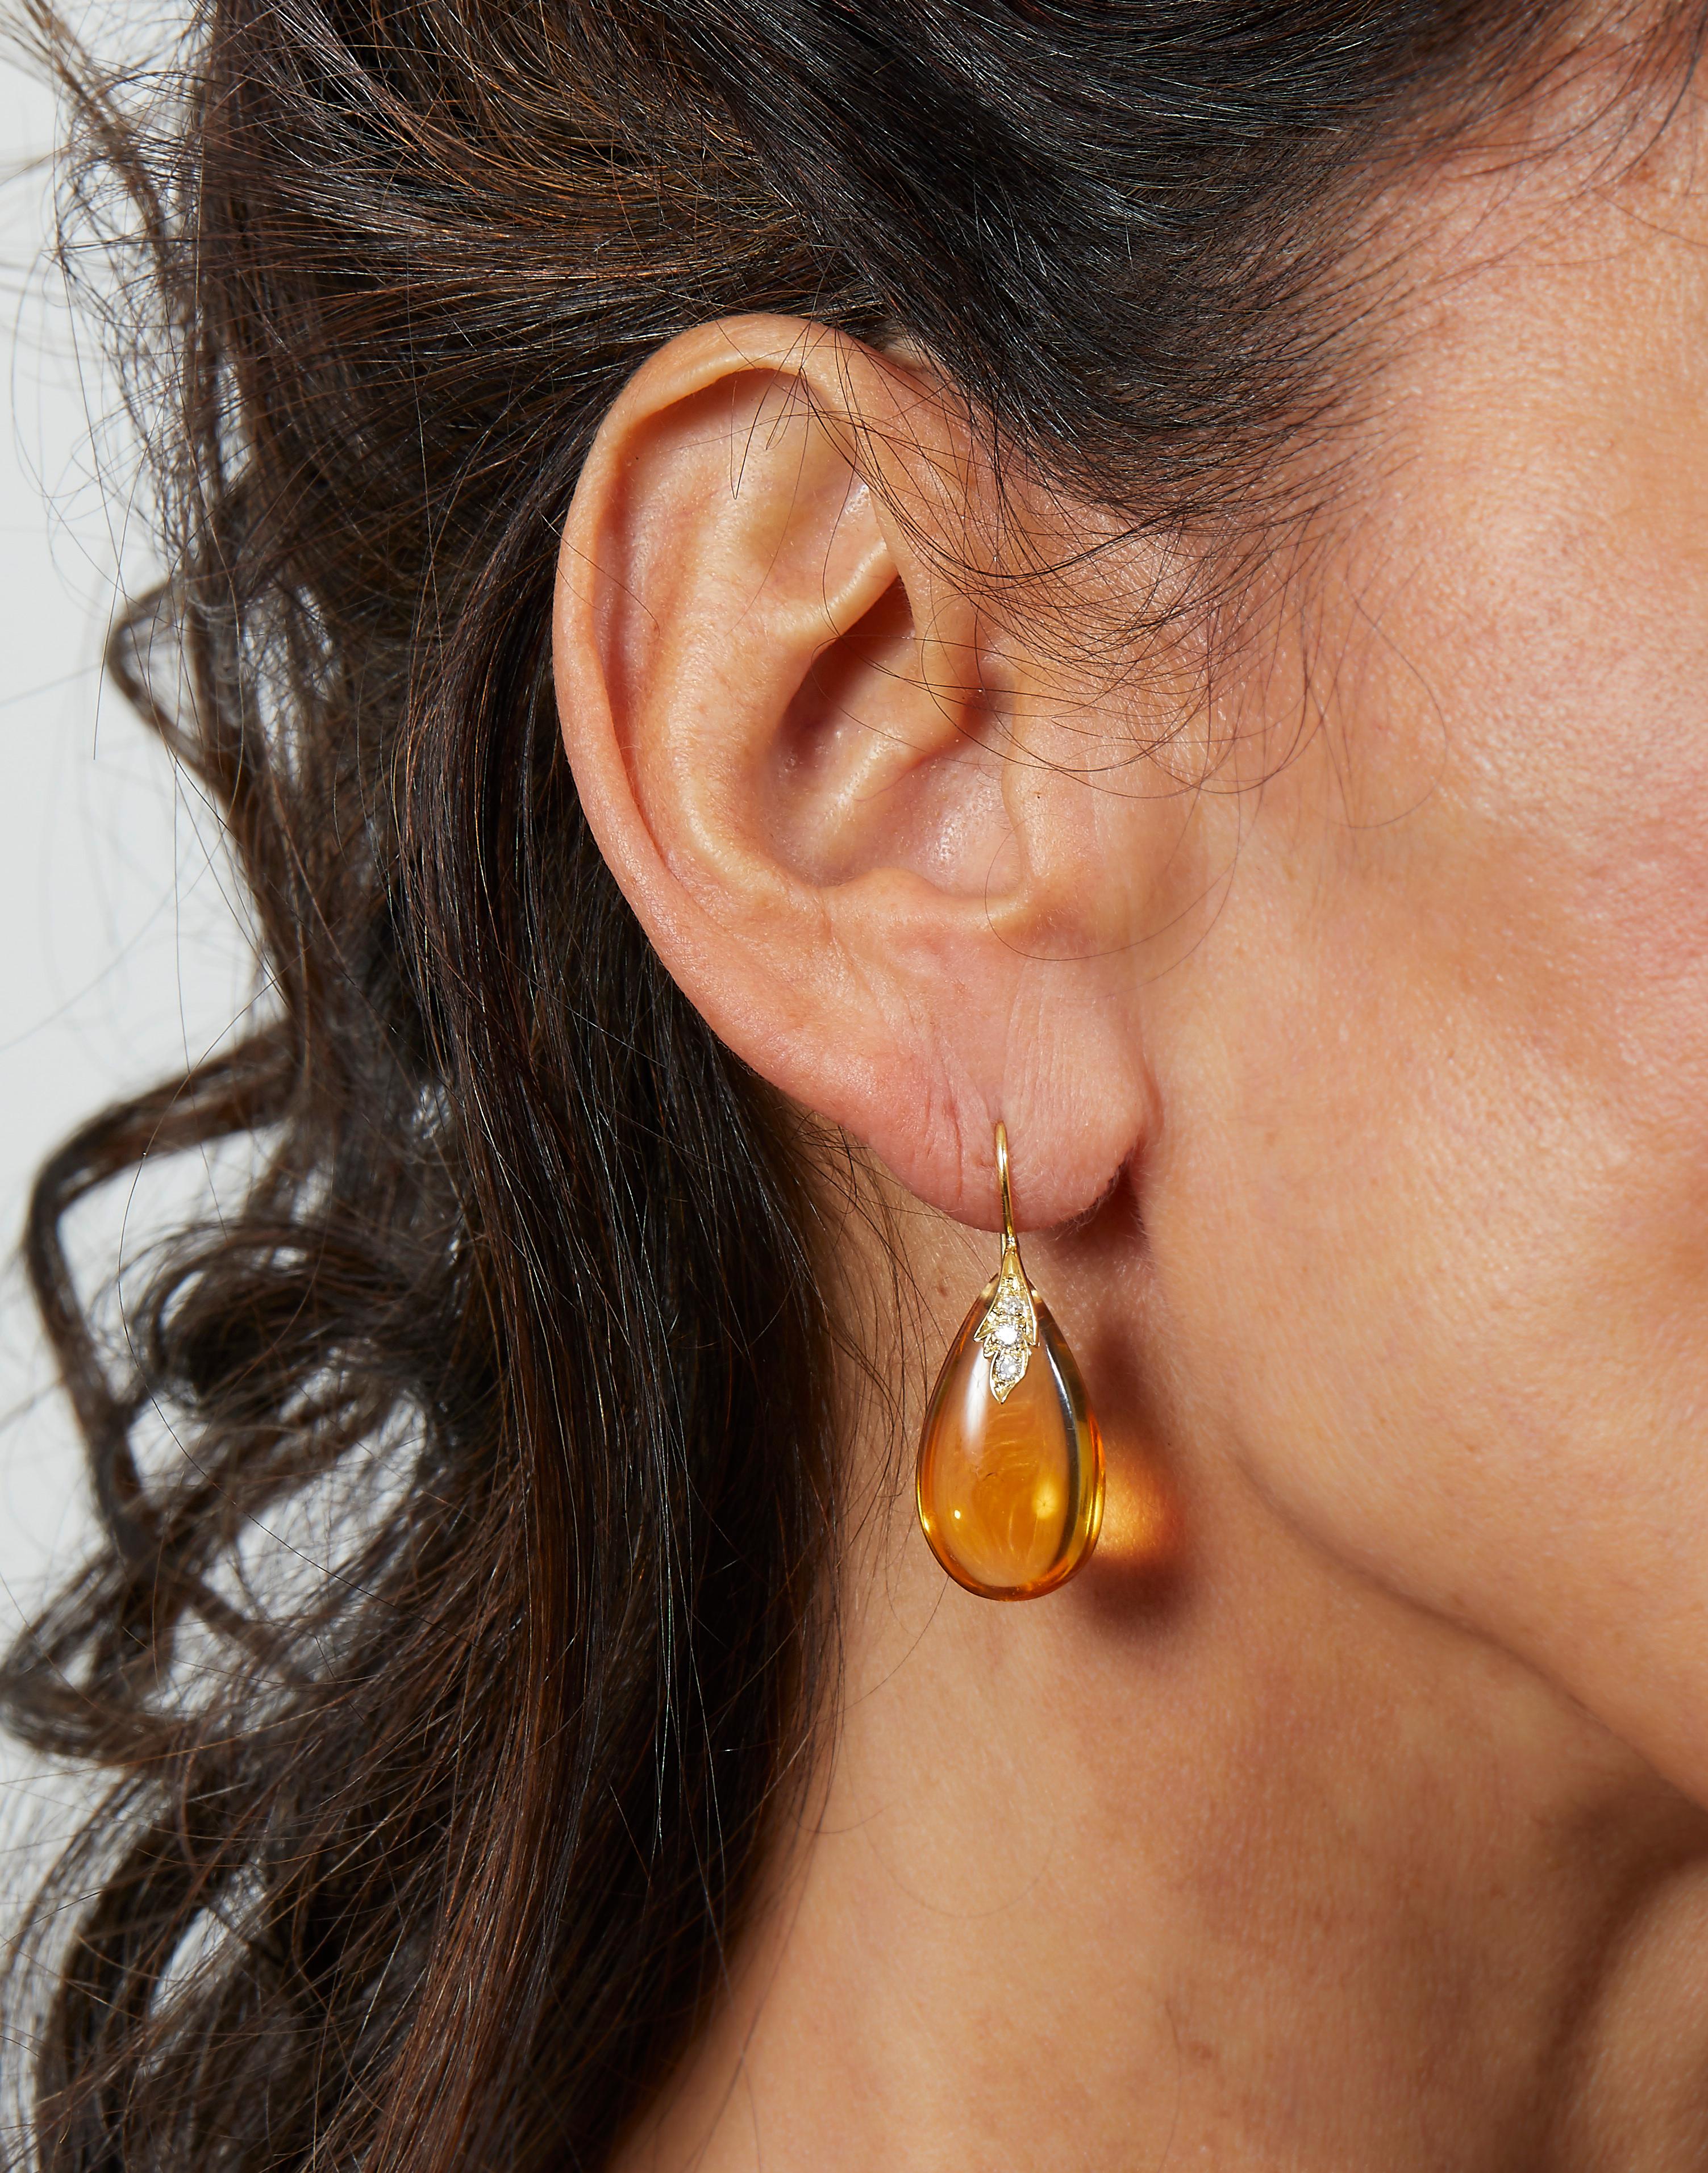 Designed by Eva Soussana, artist and founder of Hera- Jewellery, these very refined drop/ dangle earrings from the 